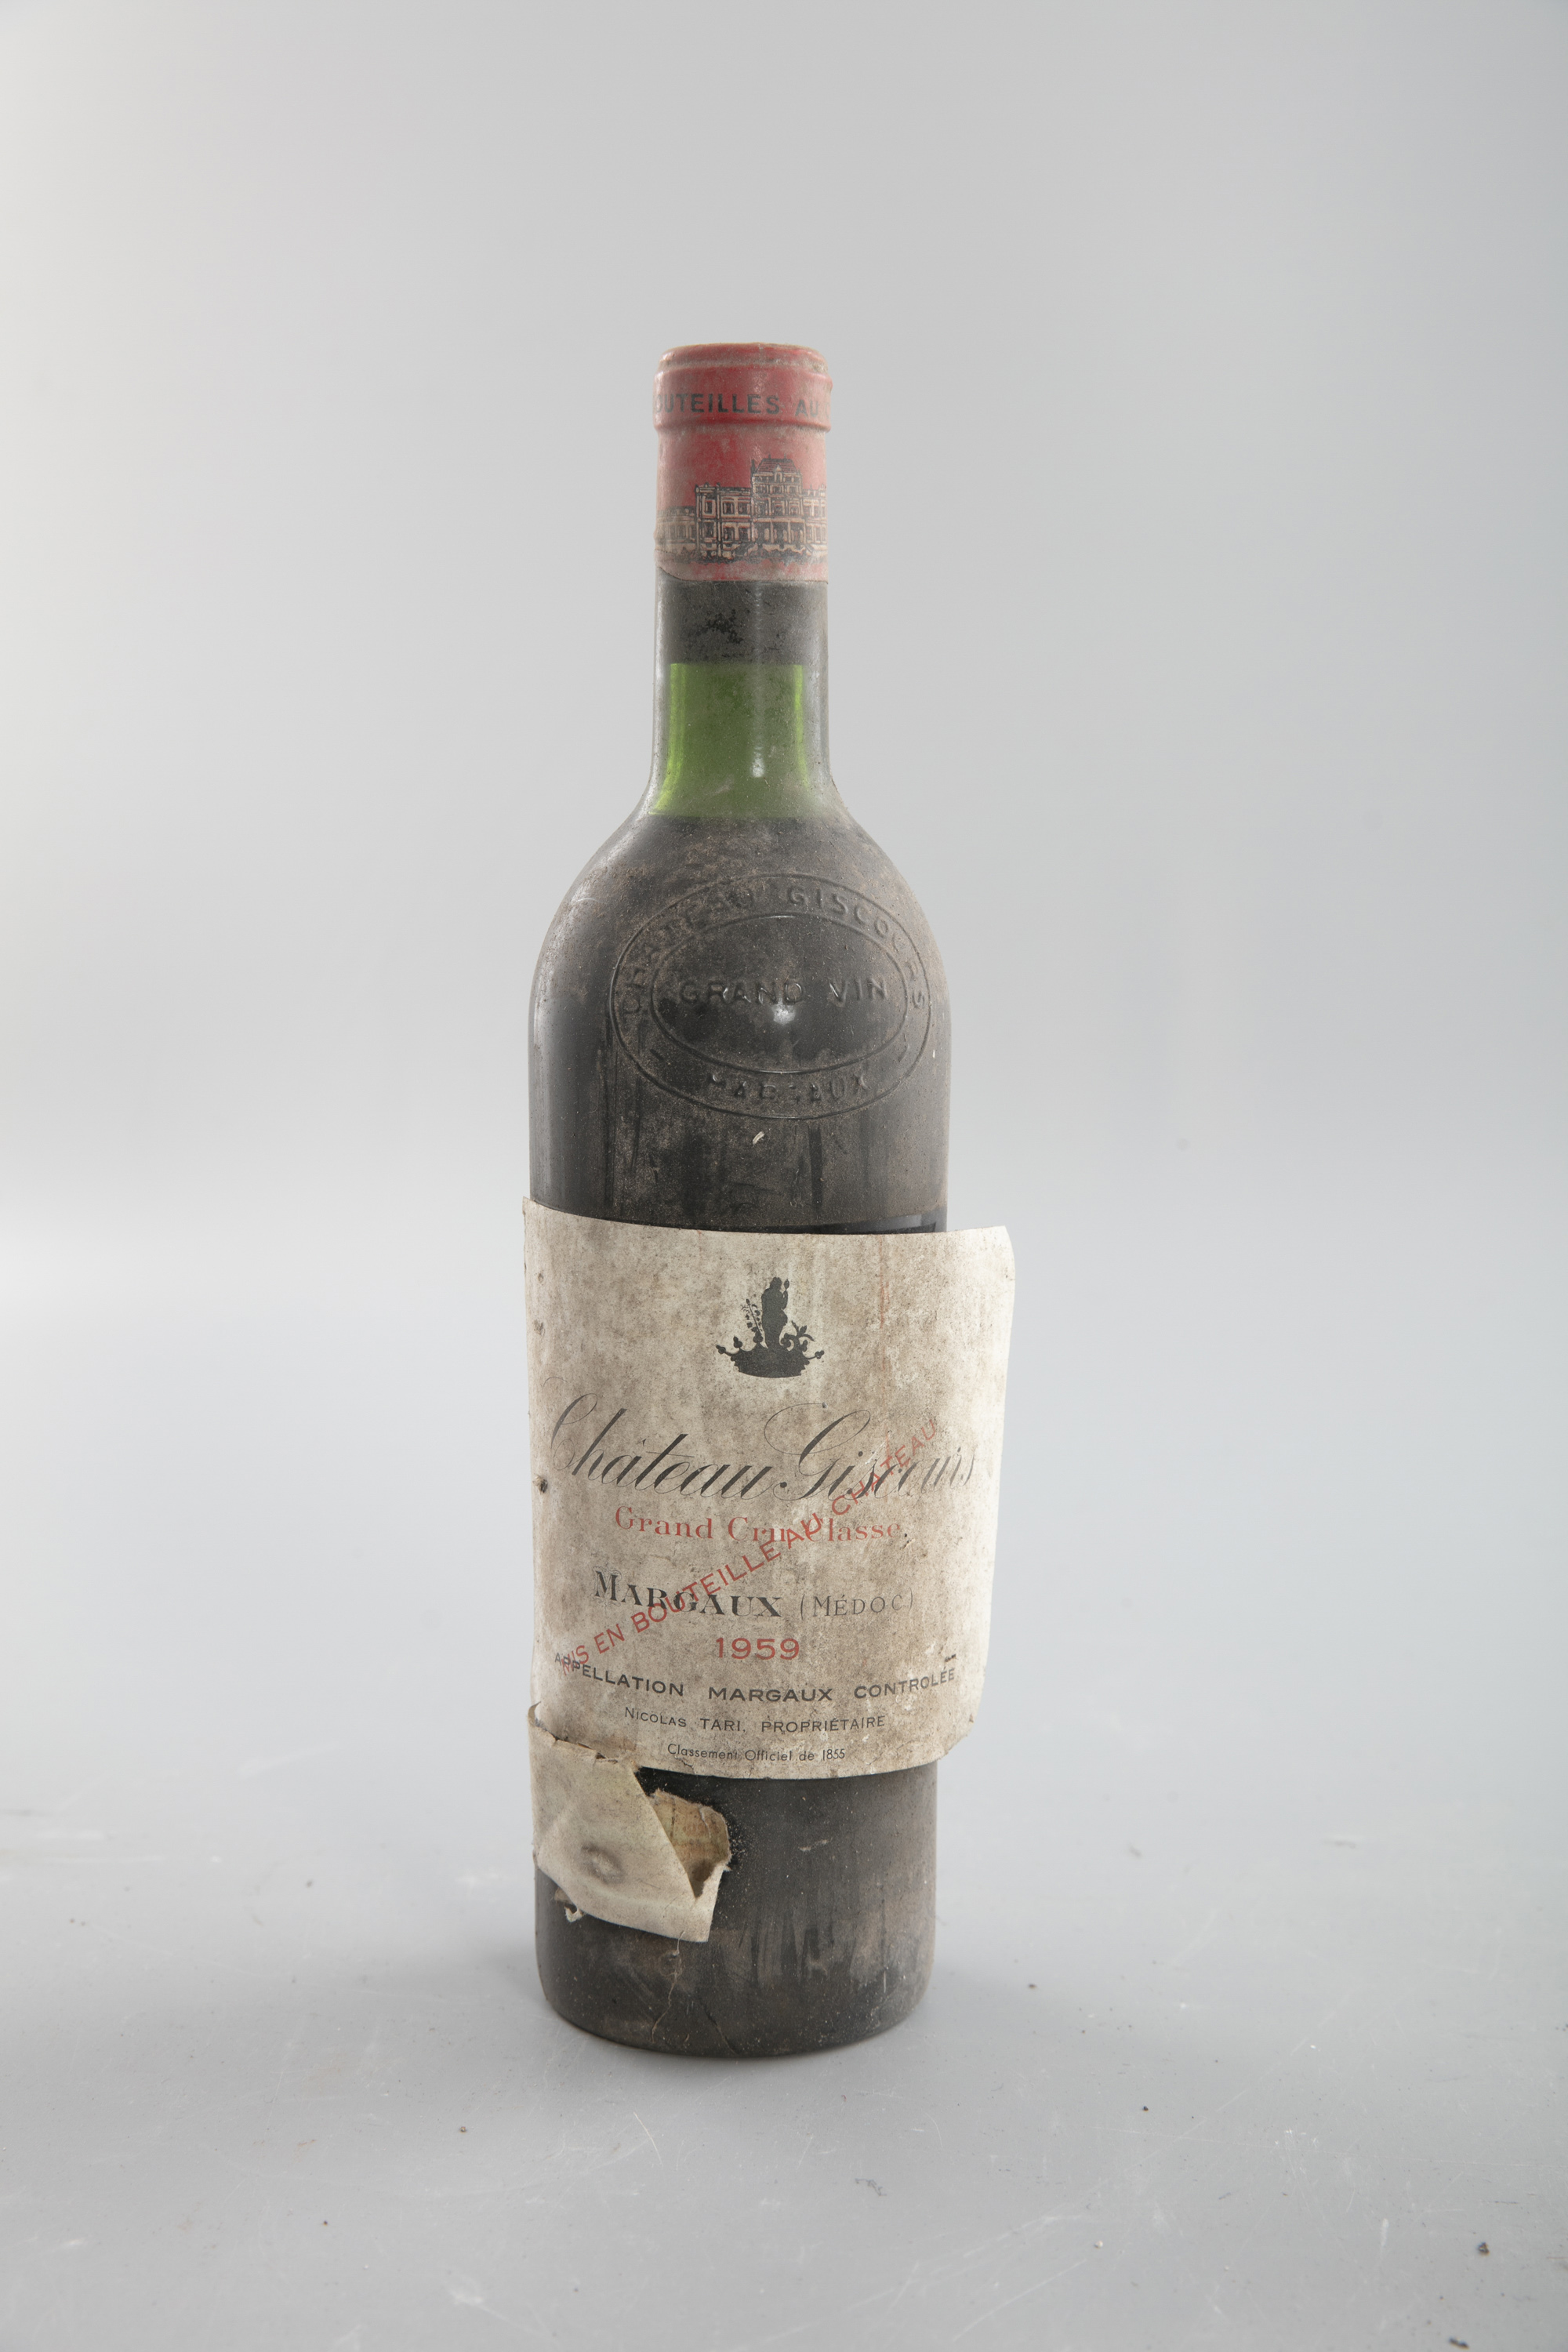 CHATEAUX GISCOURS Margaux 1959 Four bottles Worn label, fair capsules, high shoulder From the Cellar - Image 11 of 12